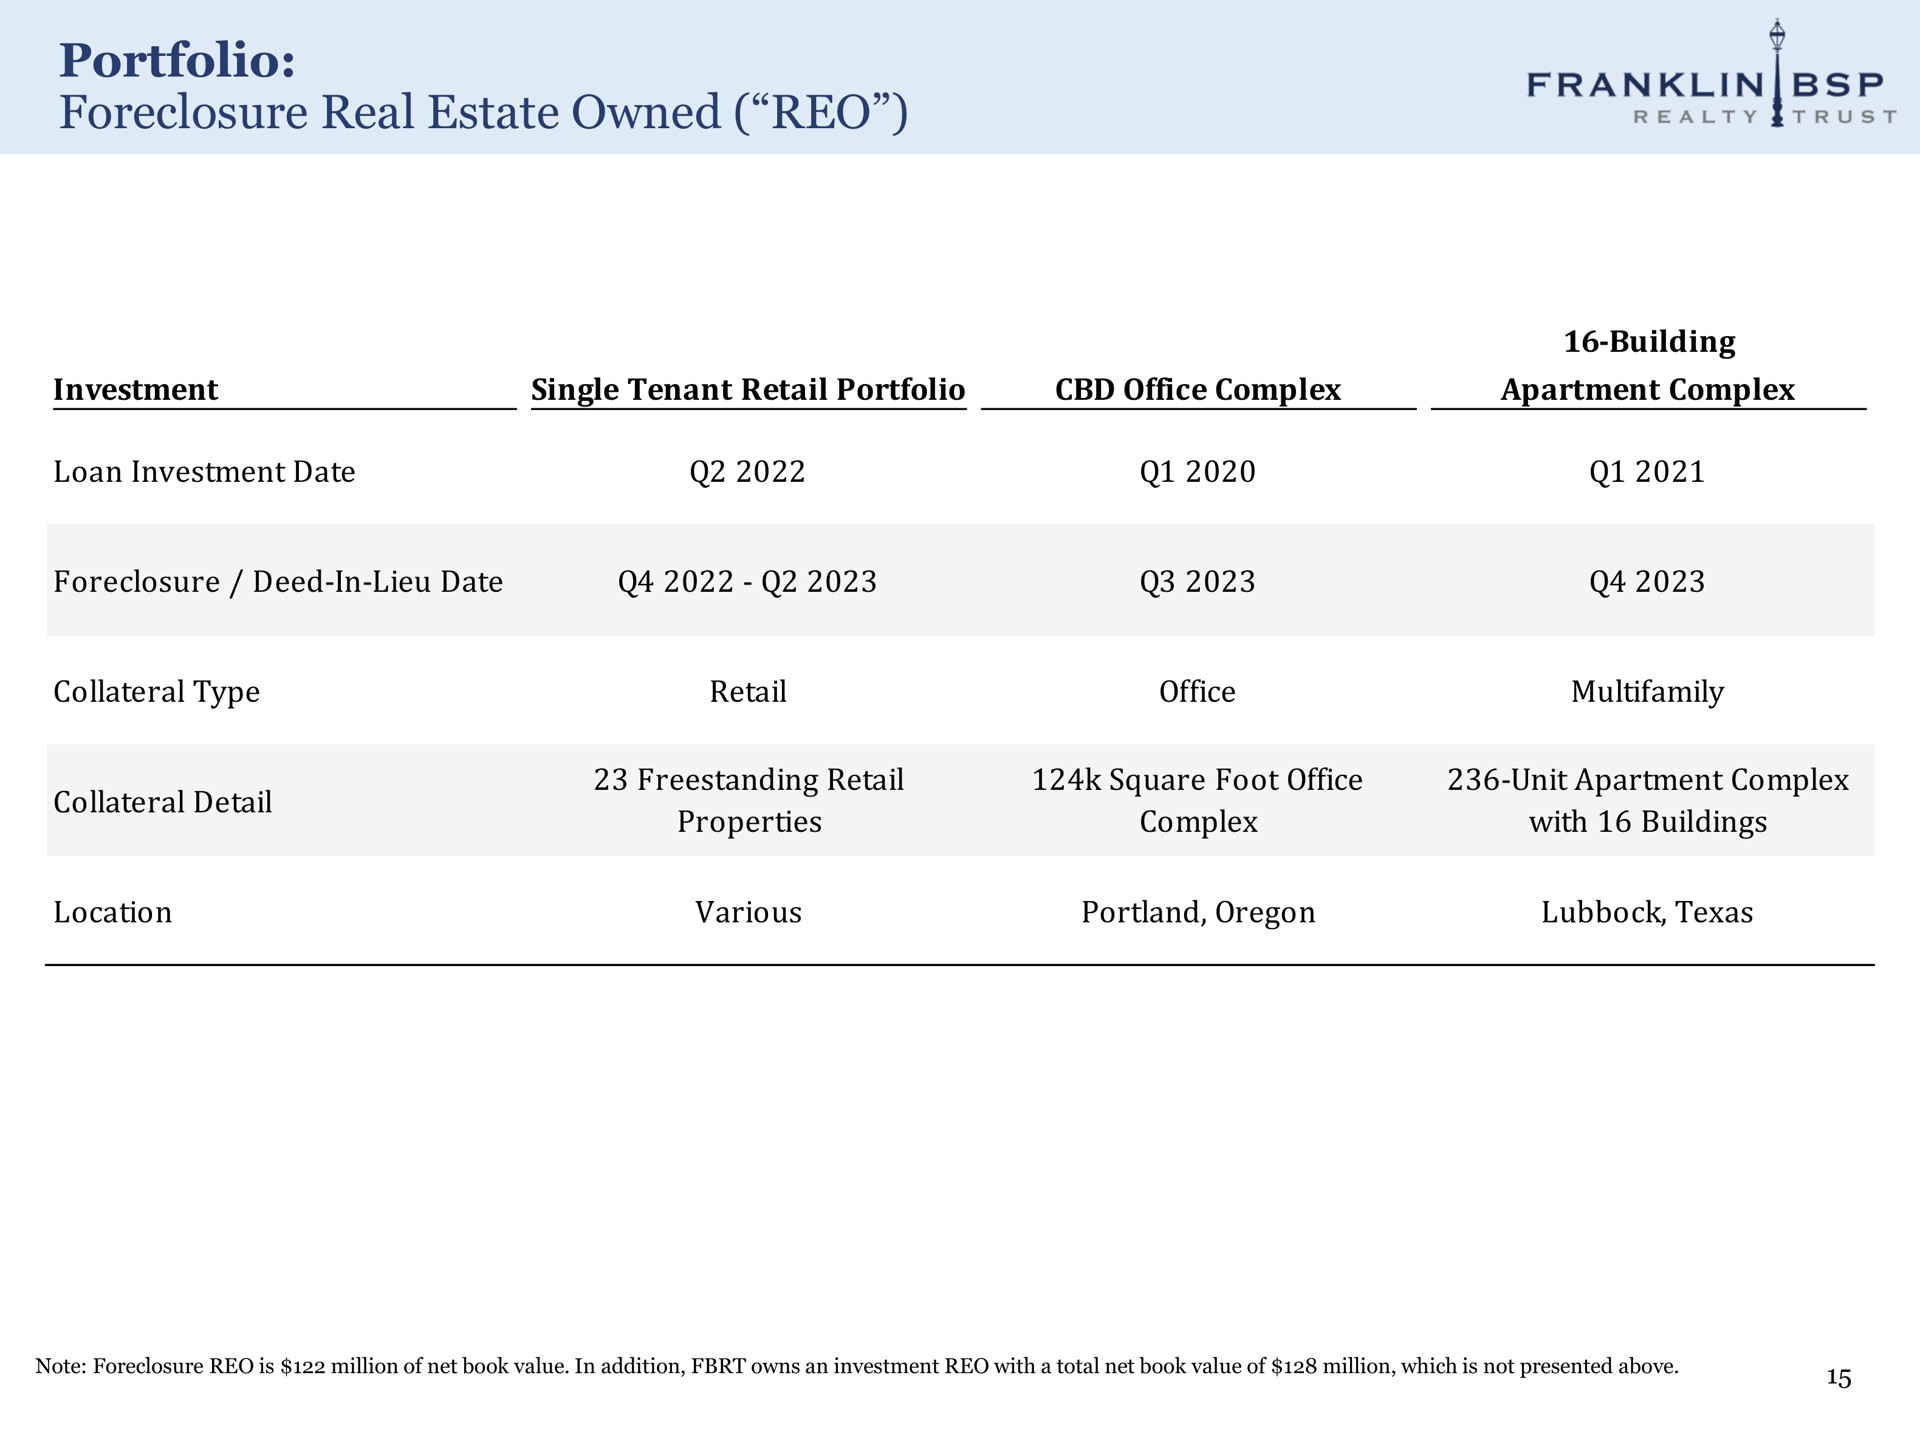 portfolio foreclosure real estate owned | Franklin BSP Realty Trust